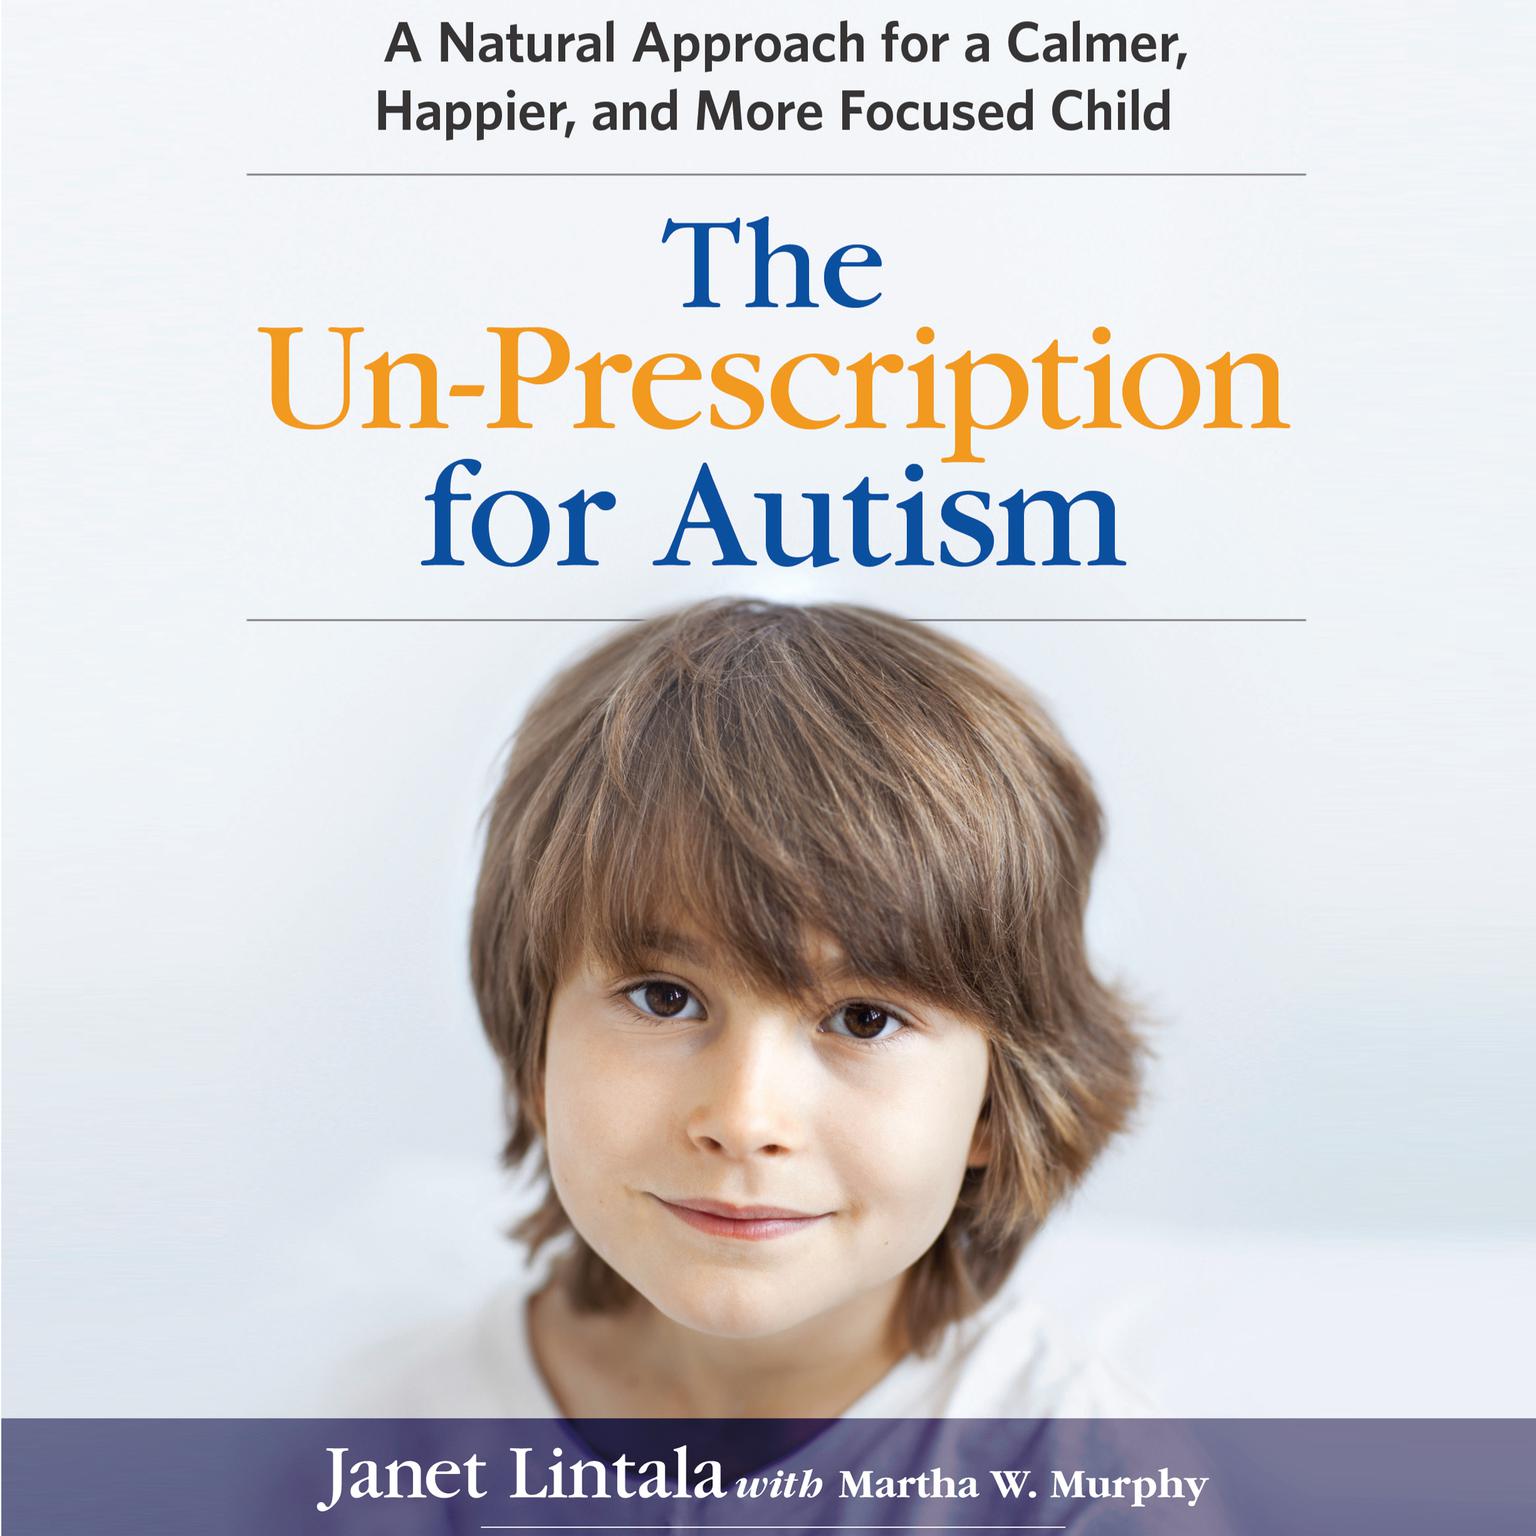 The Un-Prescription for Autism: A Natural Approach for a Calmer, Happier, and More Focused Child Audiobook, by Janet Lintala